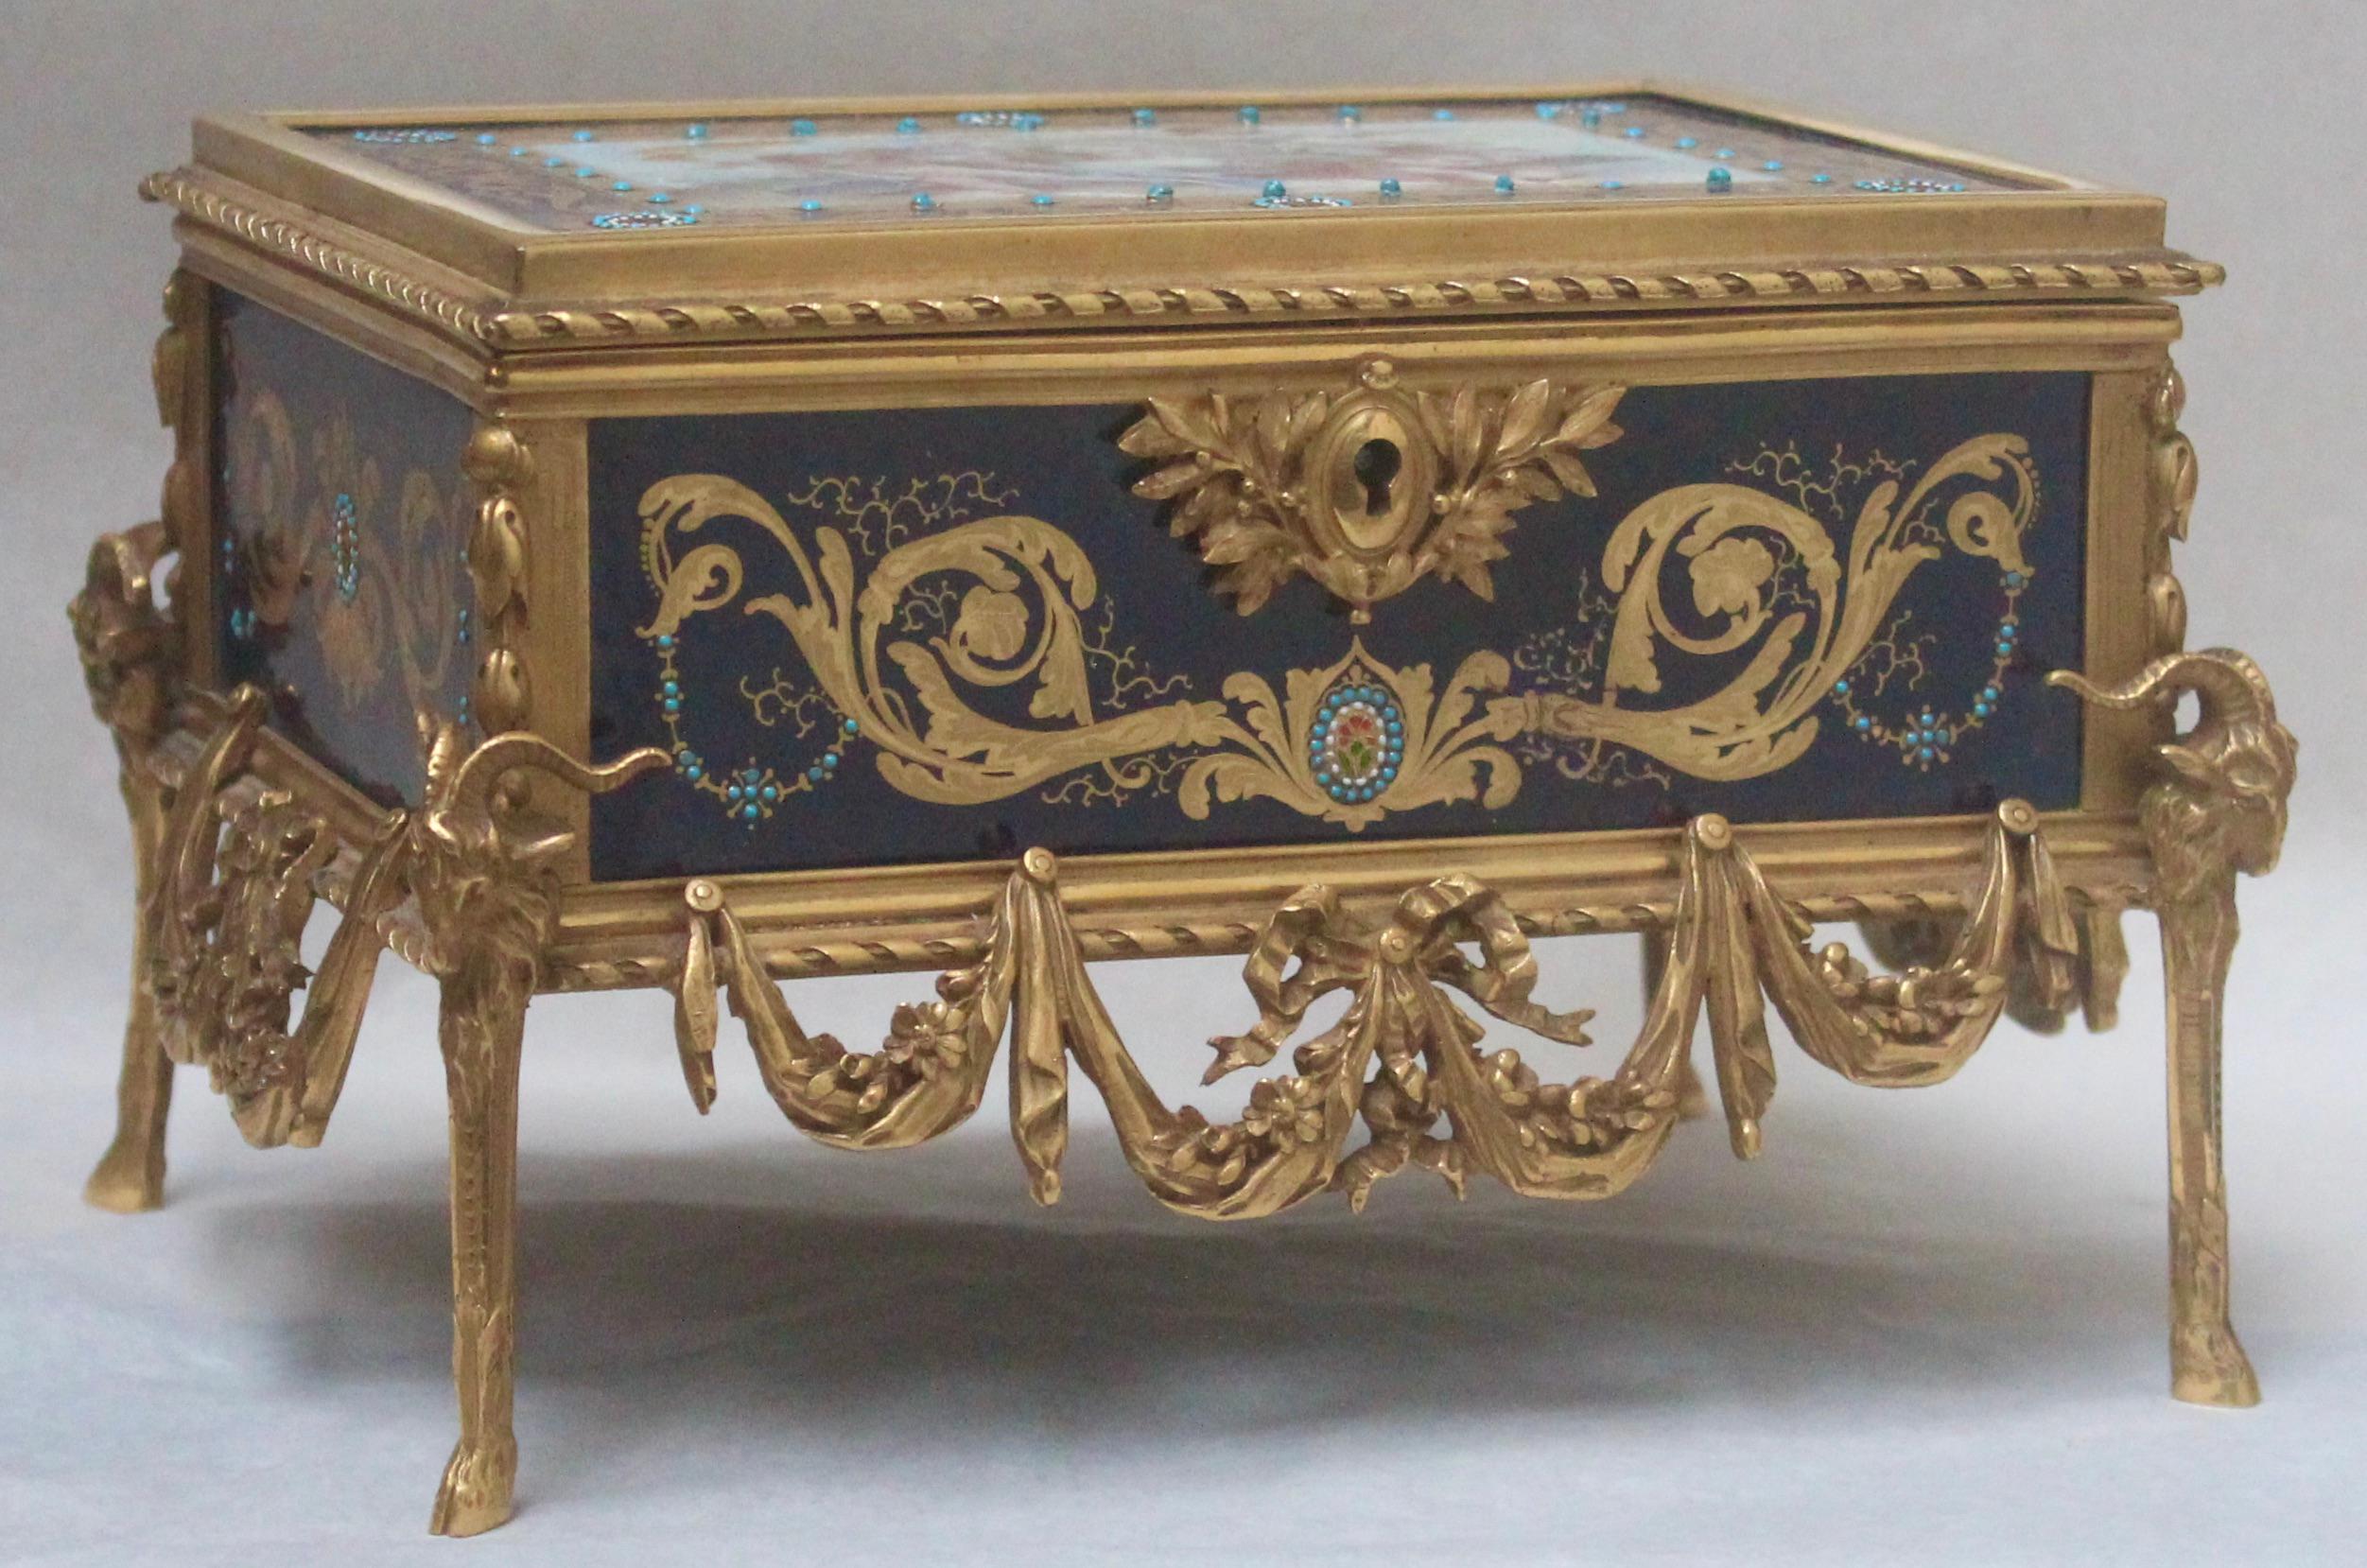 French 19th Century Enameled and Ormolu-Mounted Jewelry Casket 2